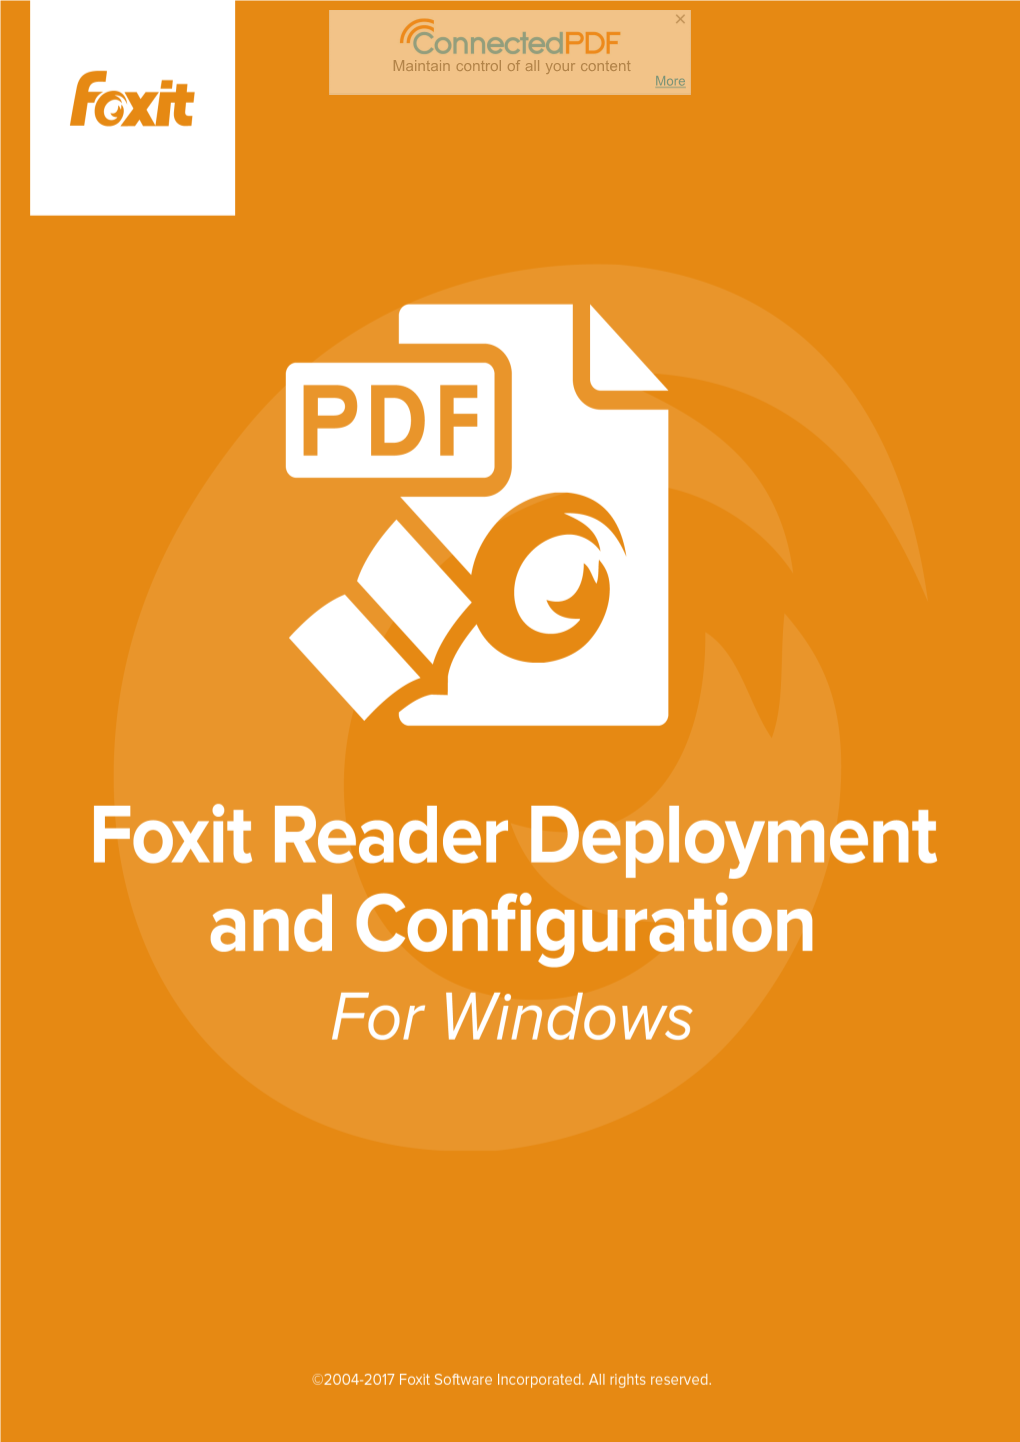 Foxit Reader Deployment and Configuration